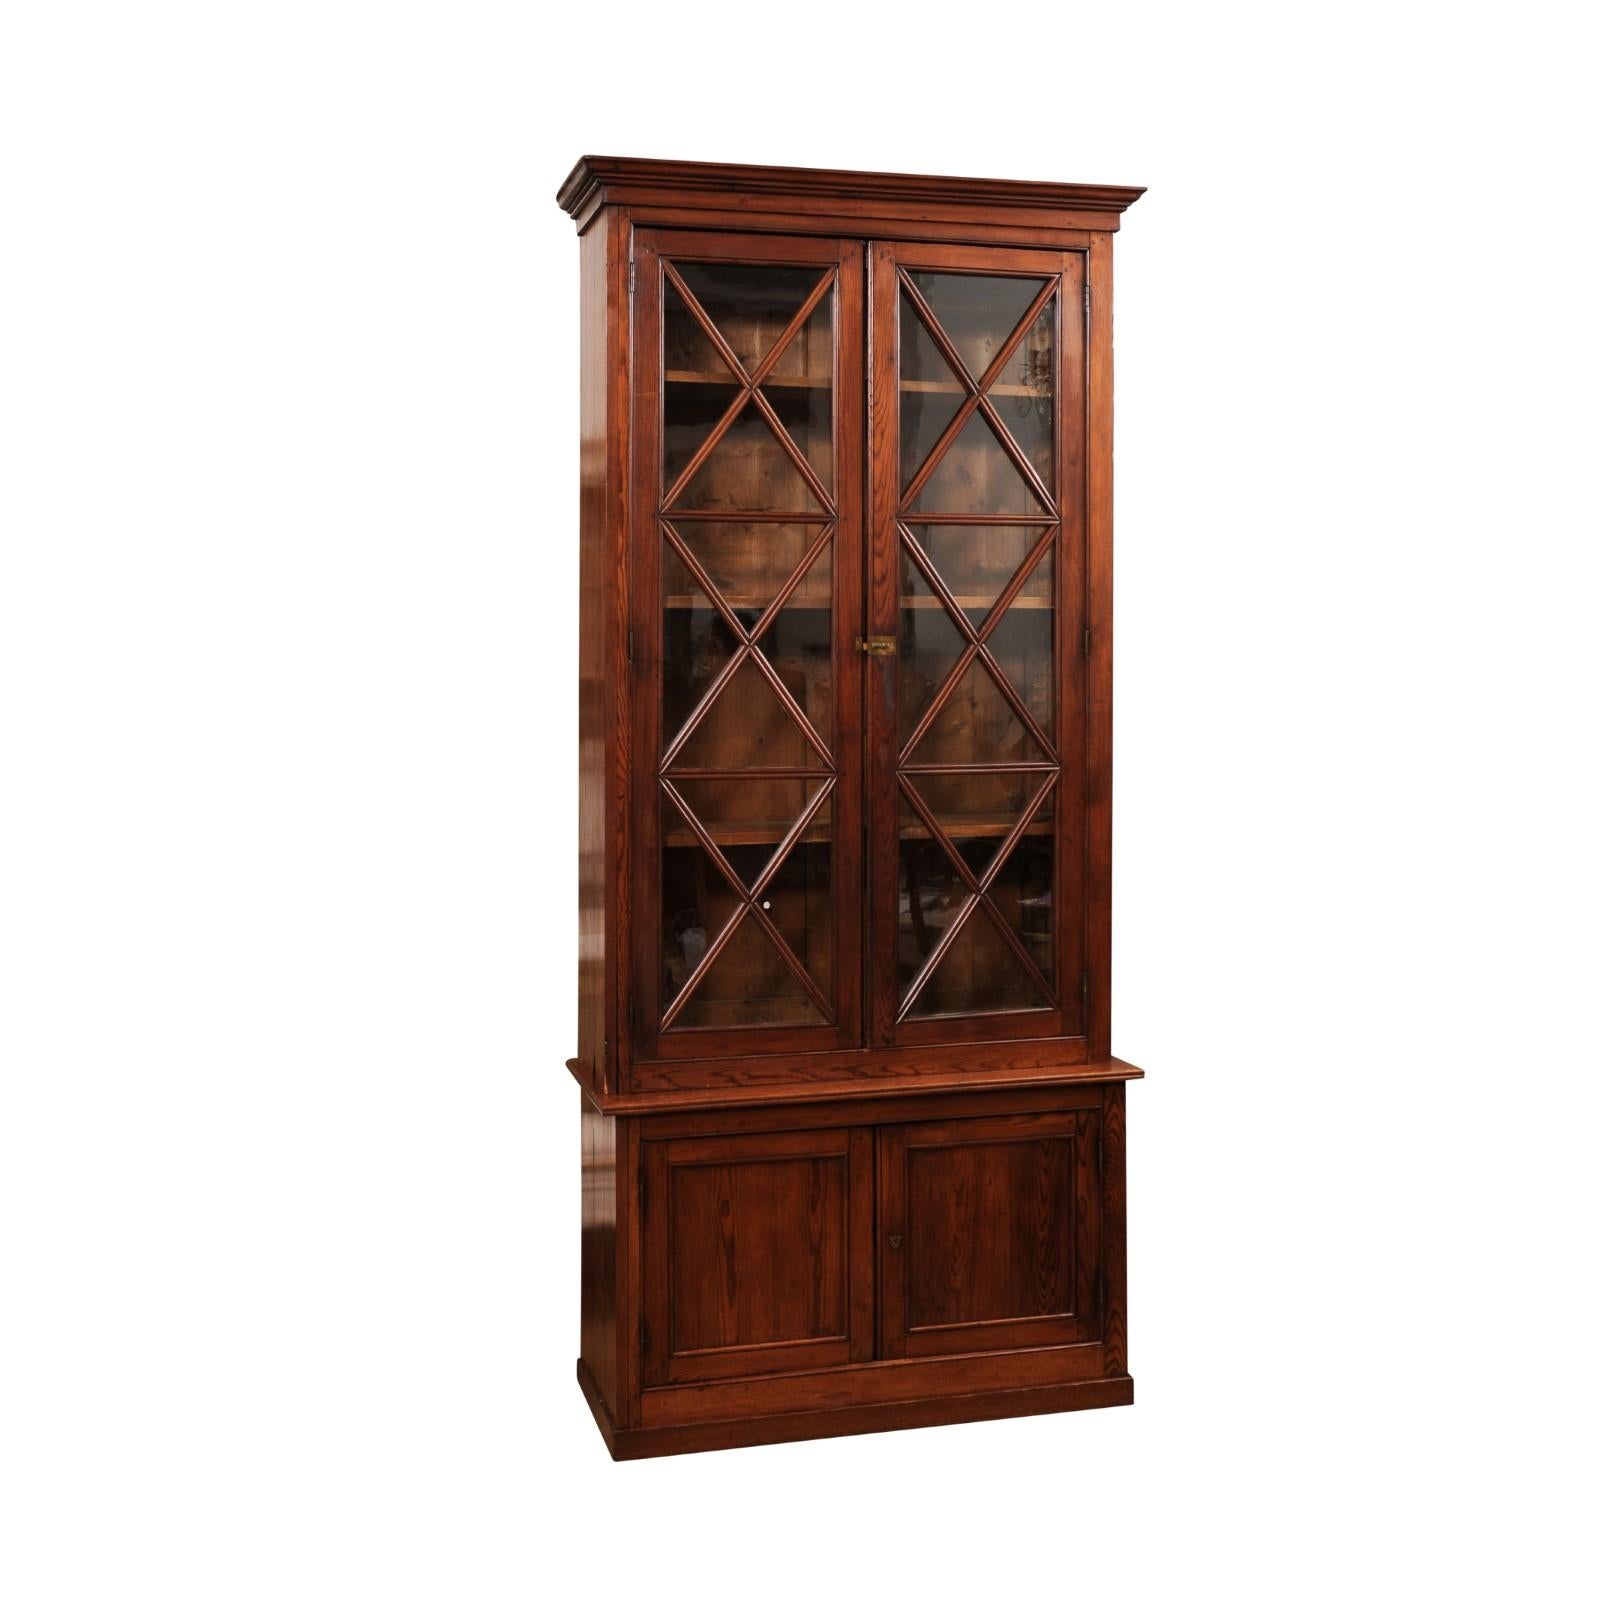 A Swedish walnut two-part vitrine cabinet from the 19th century with large glass doors and X-Form motifs. Step into the world of classic Swedish design with this elegant walnut two-part vitrine cabinet from the 19th century, a piece that perfectly